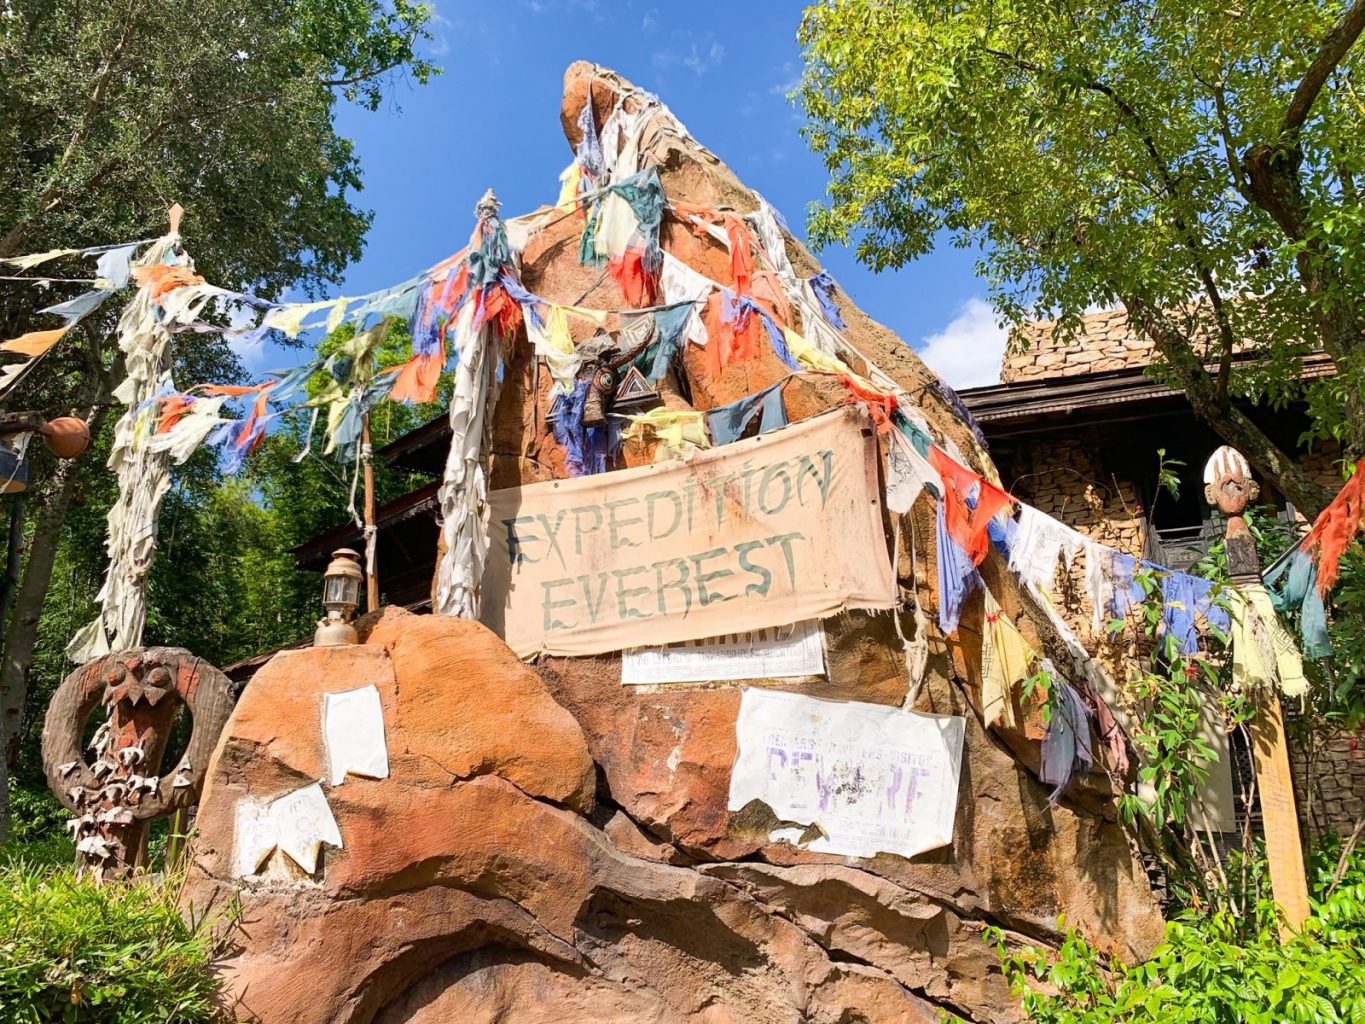 sign at the entrance of expedition everest